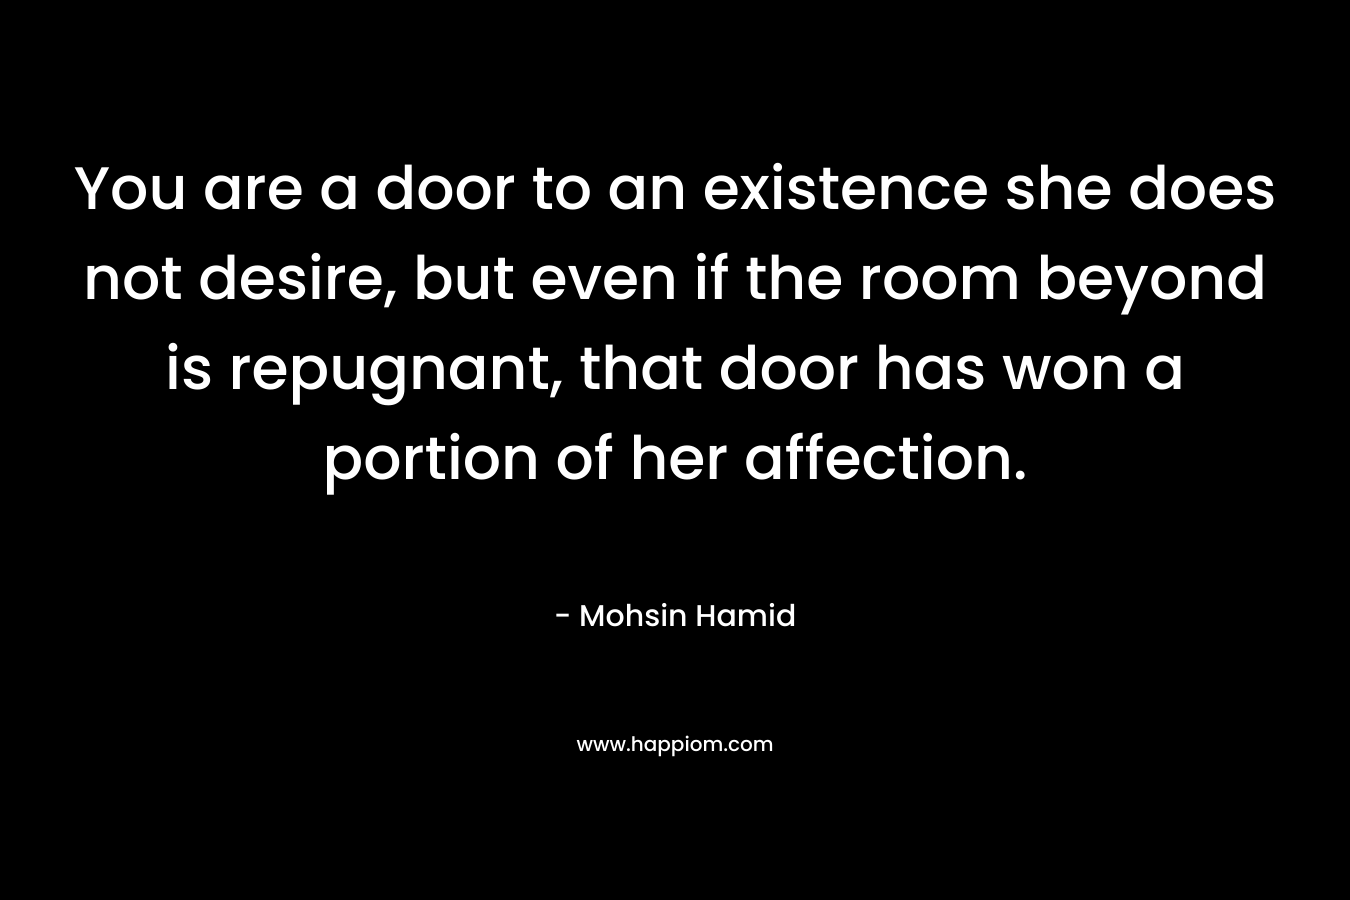 You are a door to an existence she does not desire, but even if the room beyond is repugnant, that door has won a portion of her affection.